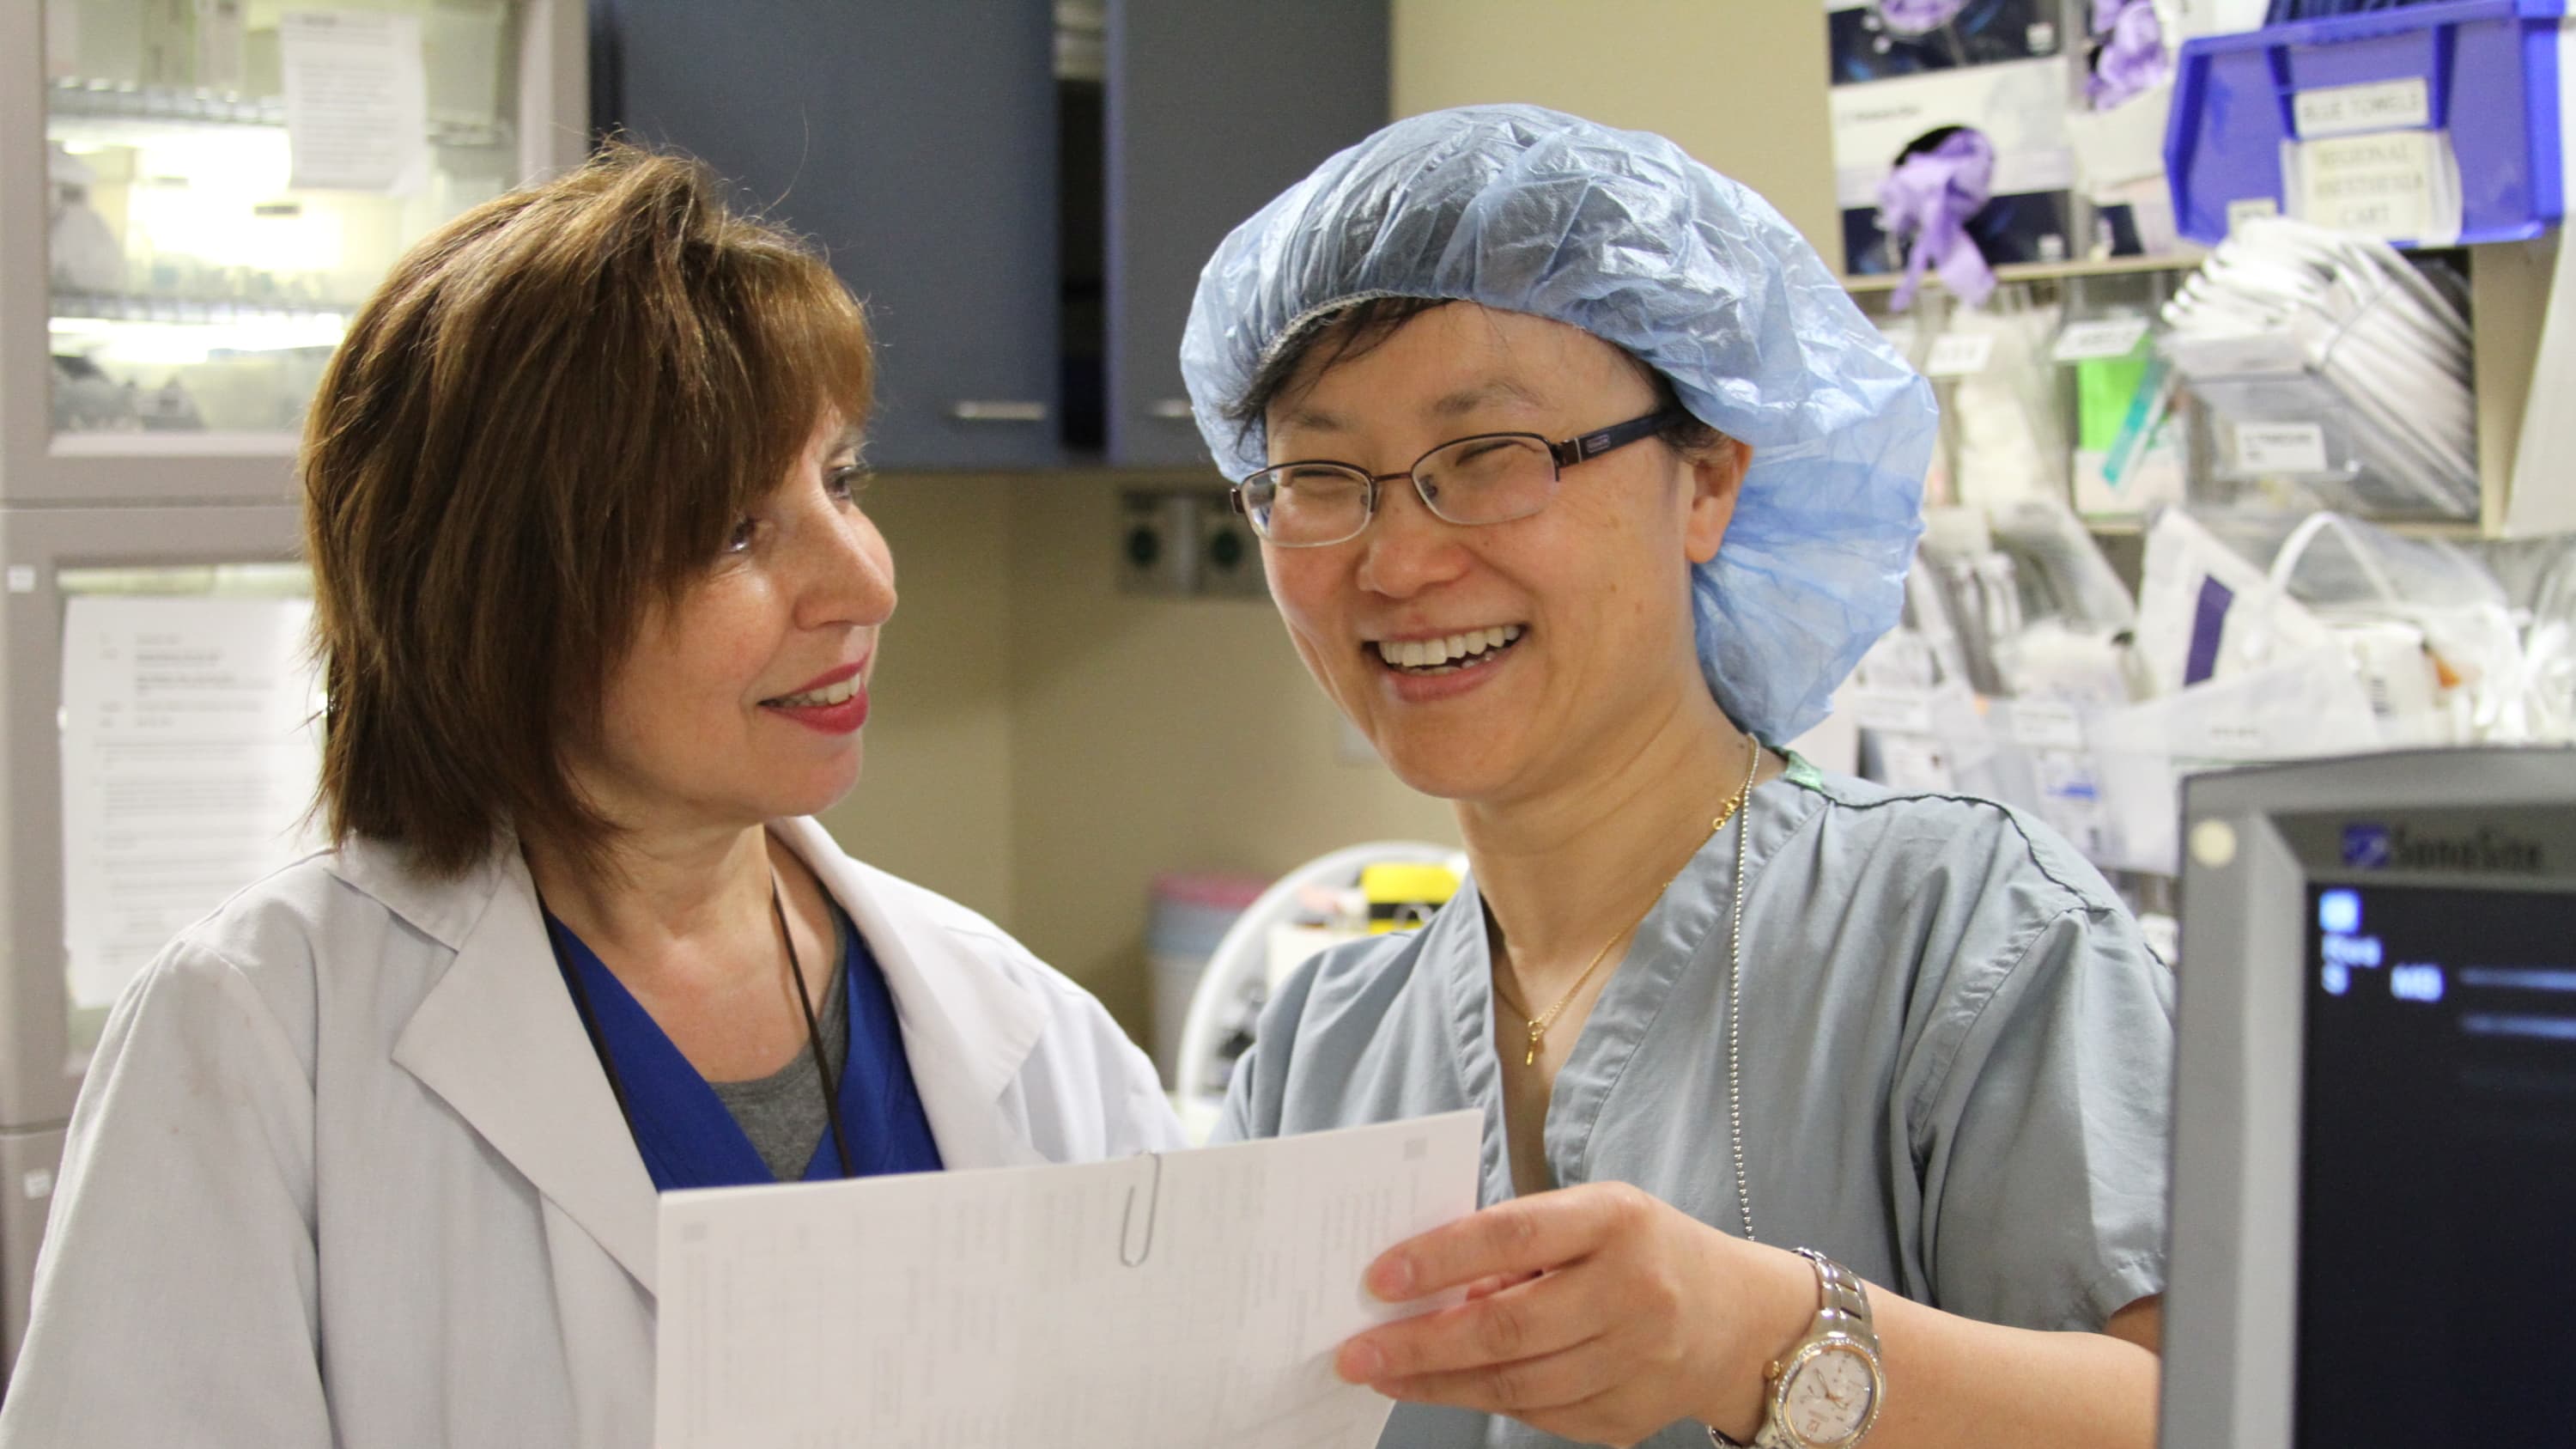 Nerve block nurse Lisa Mastrangello (on the left) with Jinlei Li, MD, an anesthesiologist, discussing a nerve block, which is a type of regional anesthesia.